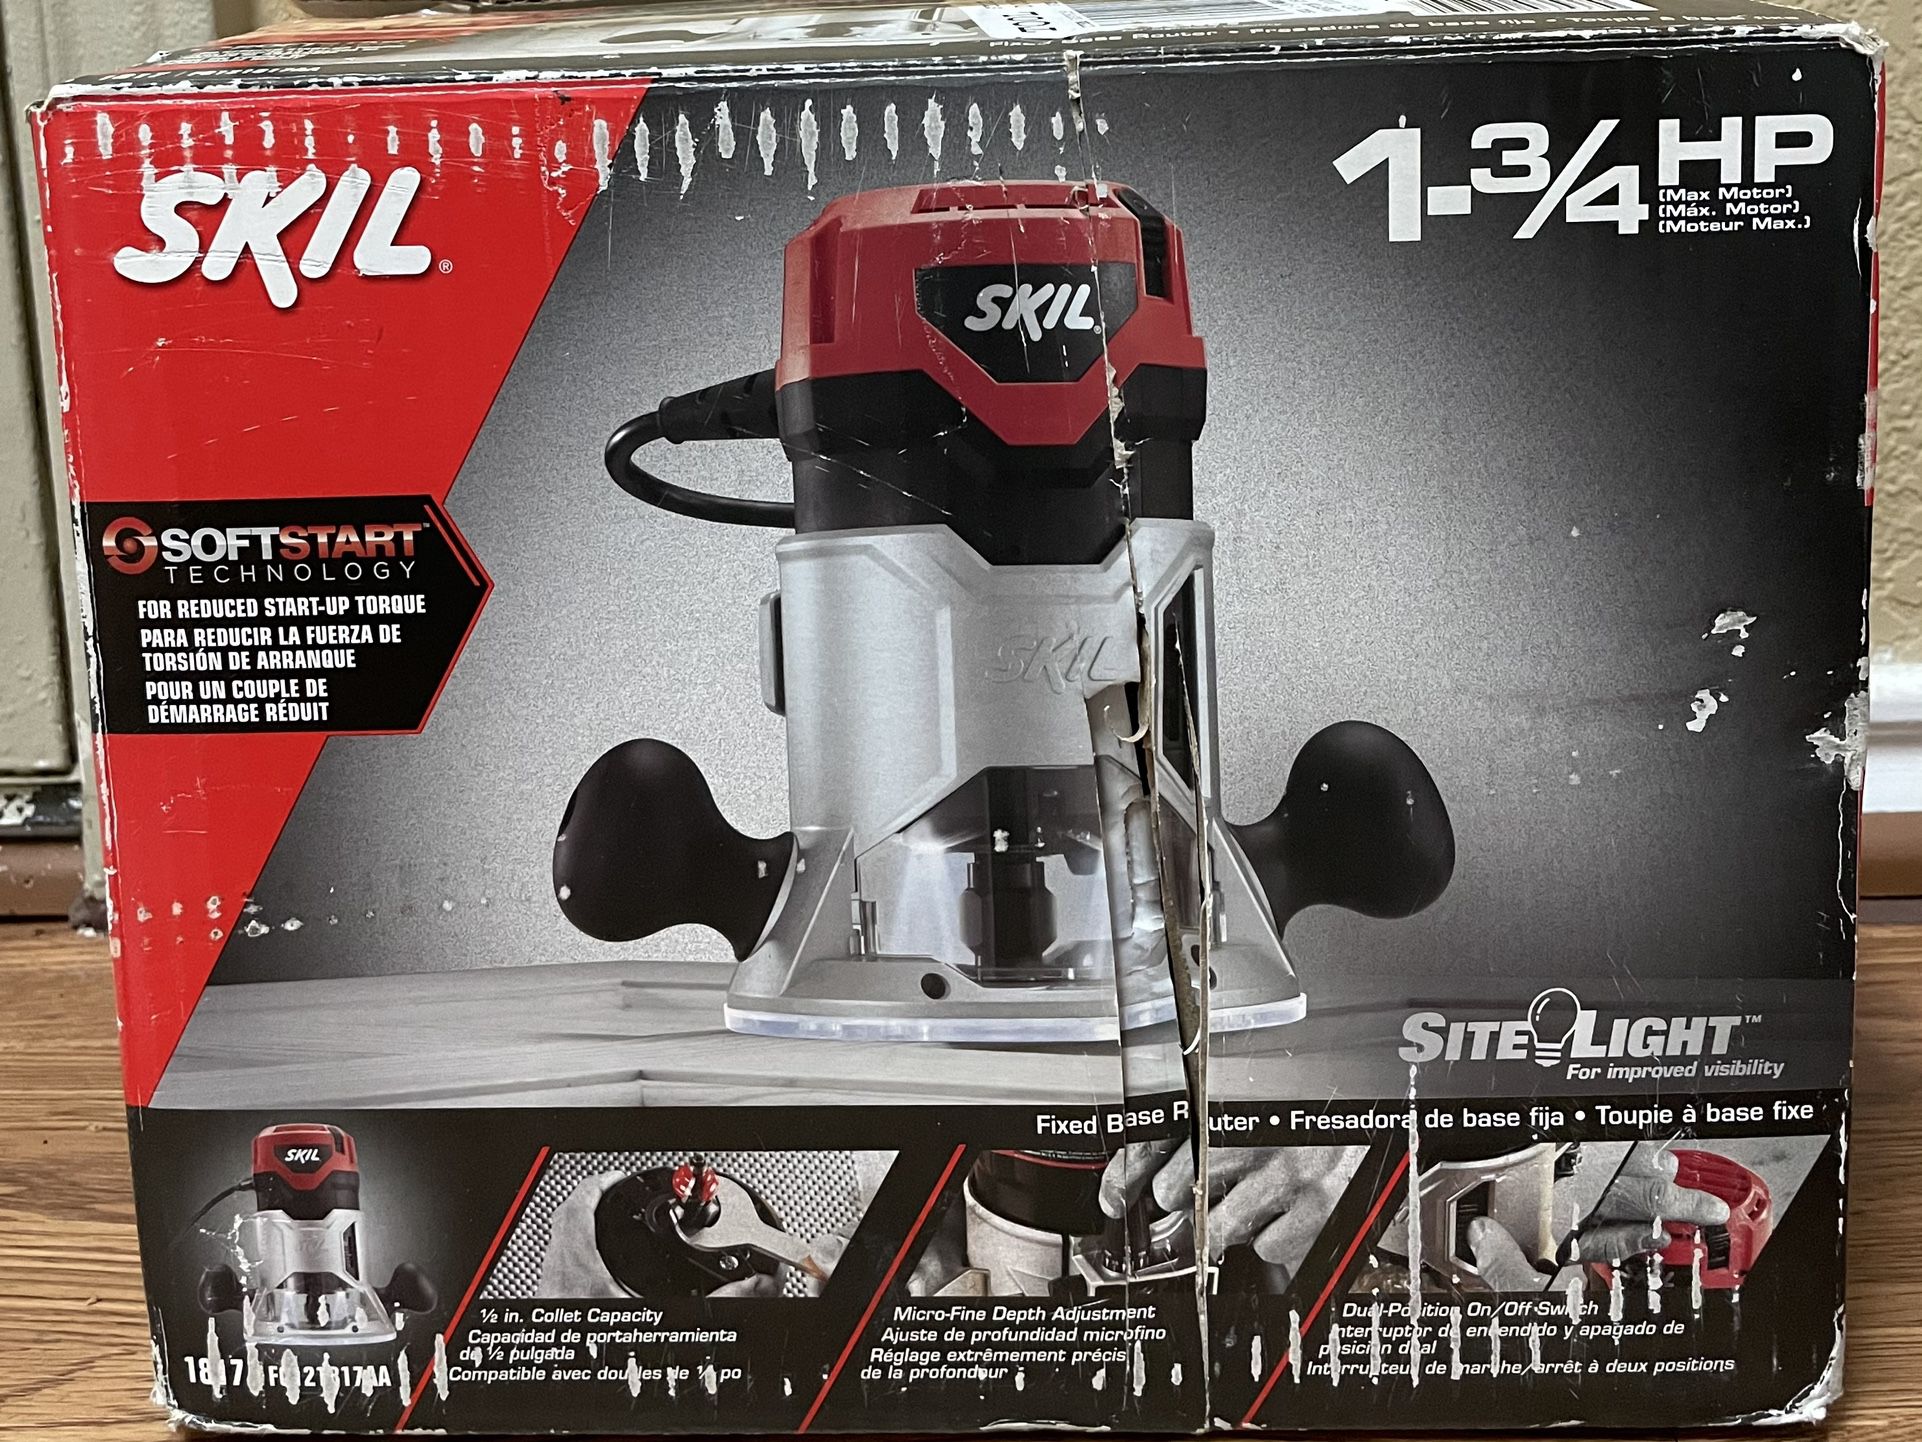 Skil 1817 1-3/4 HP Fixed-Base Router w/ Soft Start